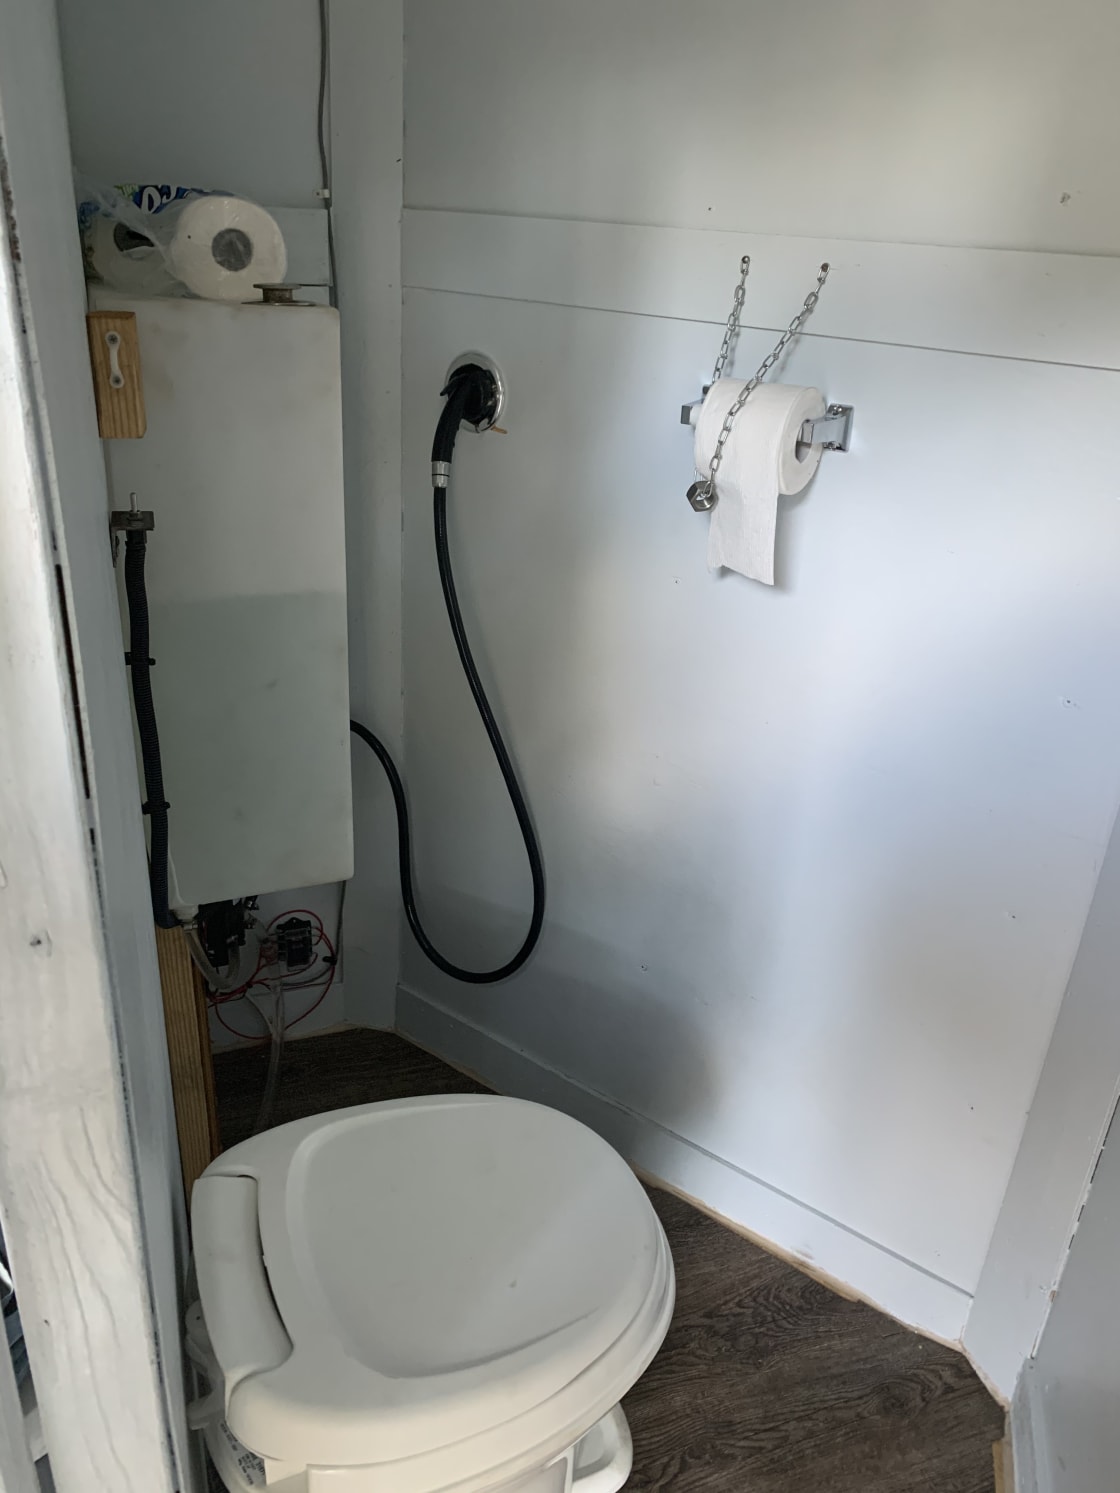 Bathroom in trailer.  Shower is on the exterior of trailer.  14 gallons of water provided